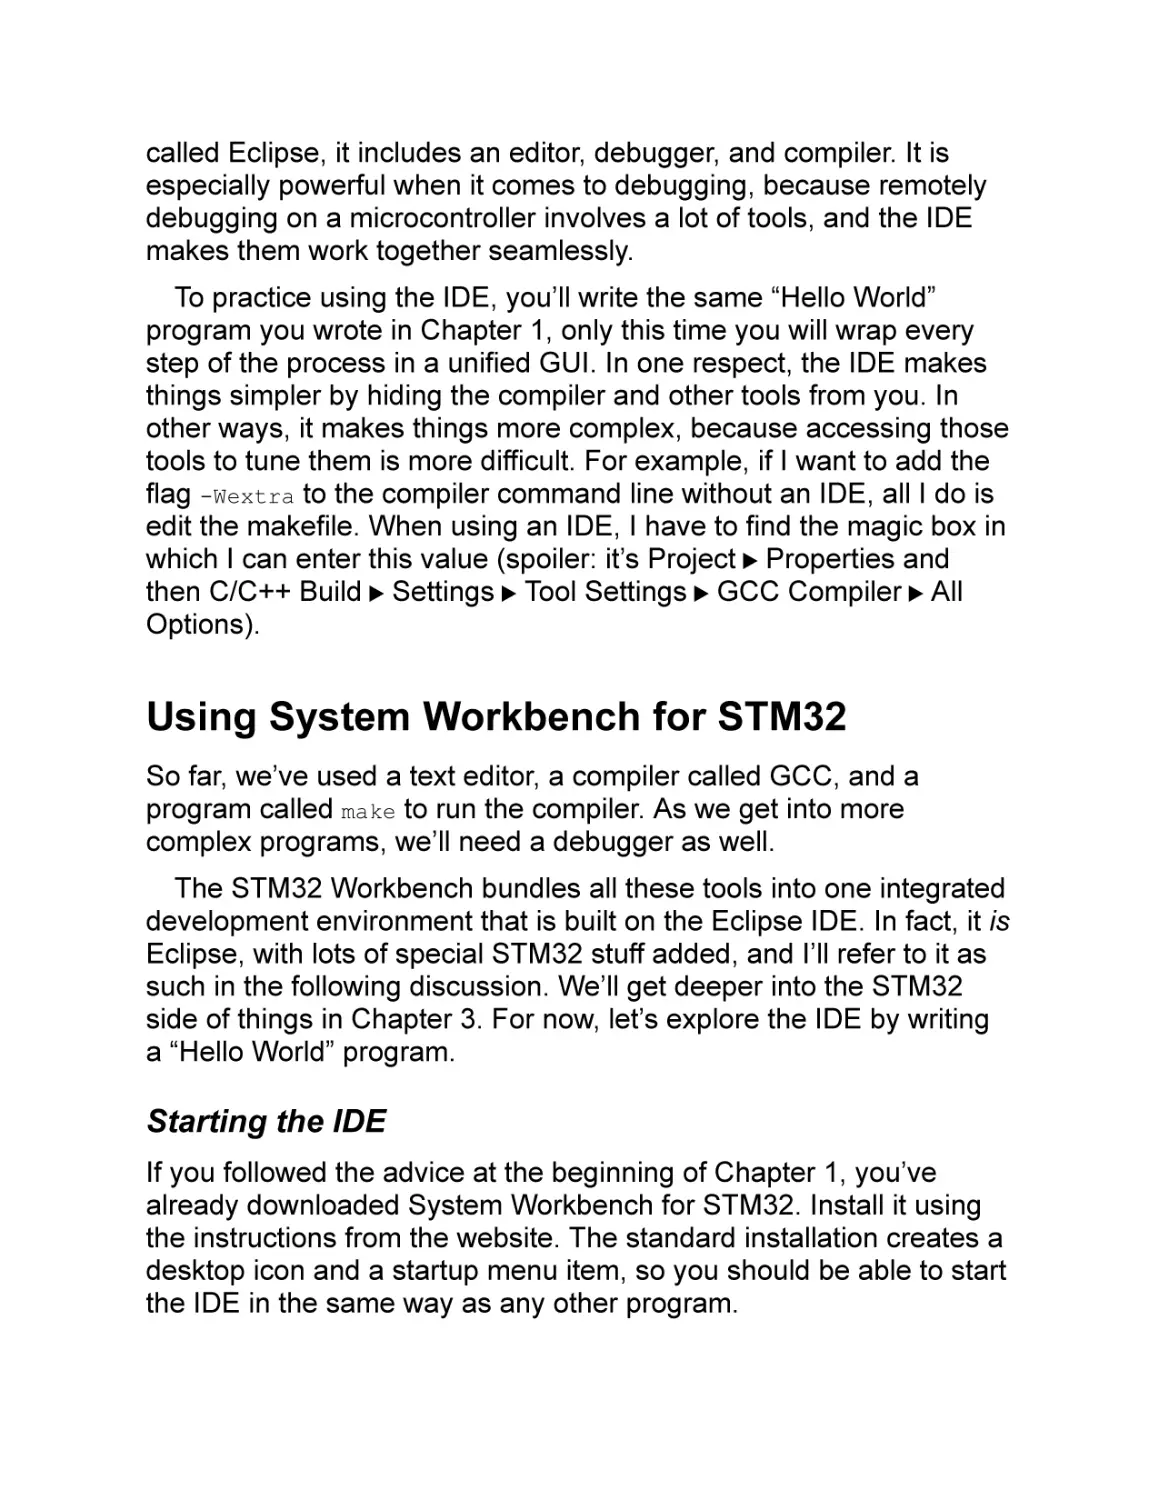 Using System Workbench for STM32
Starting the IDE